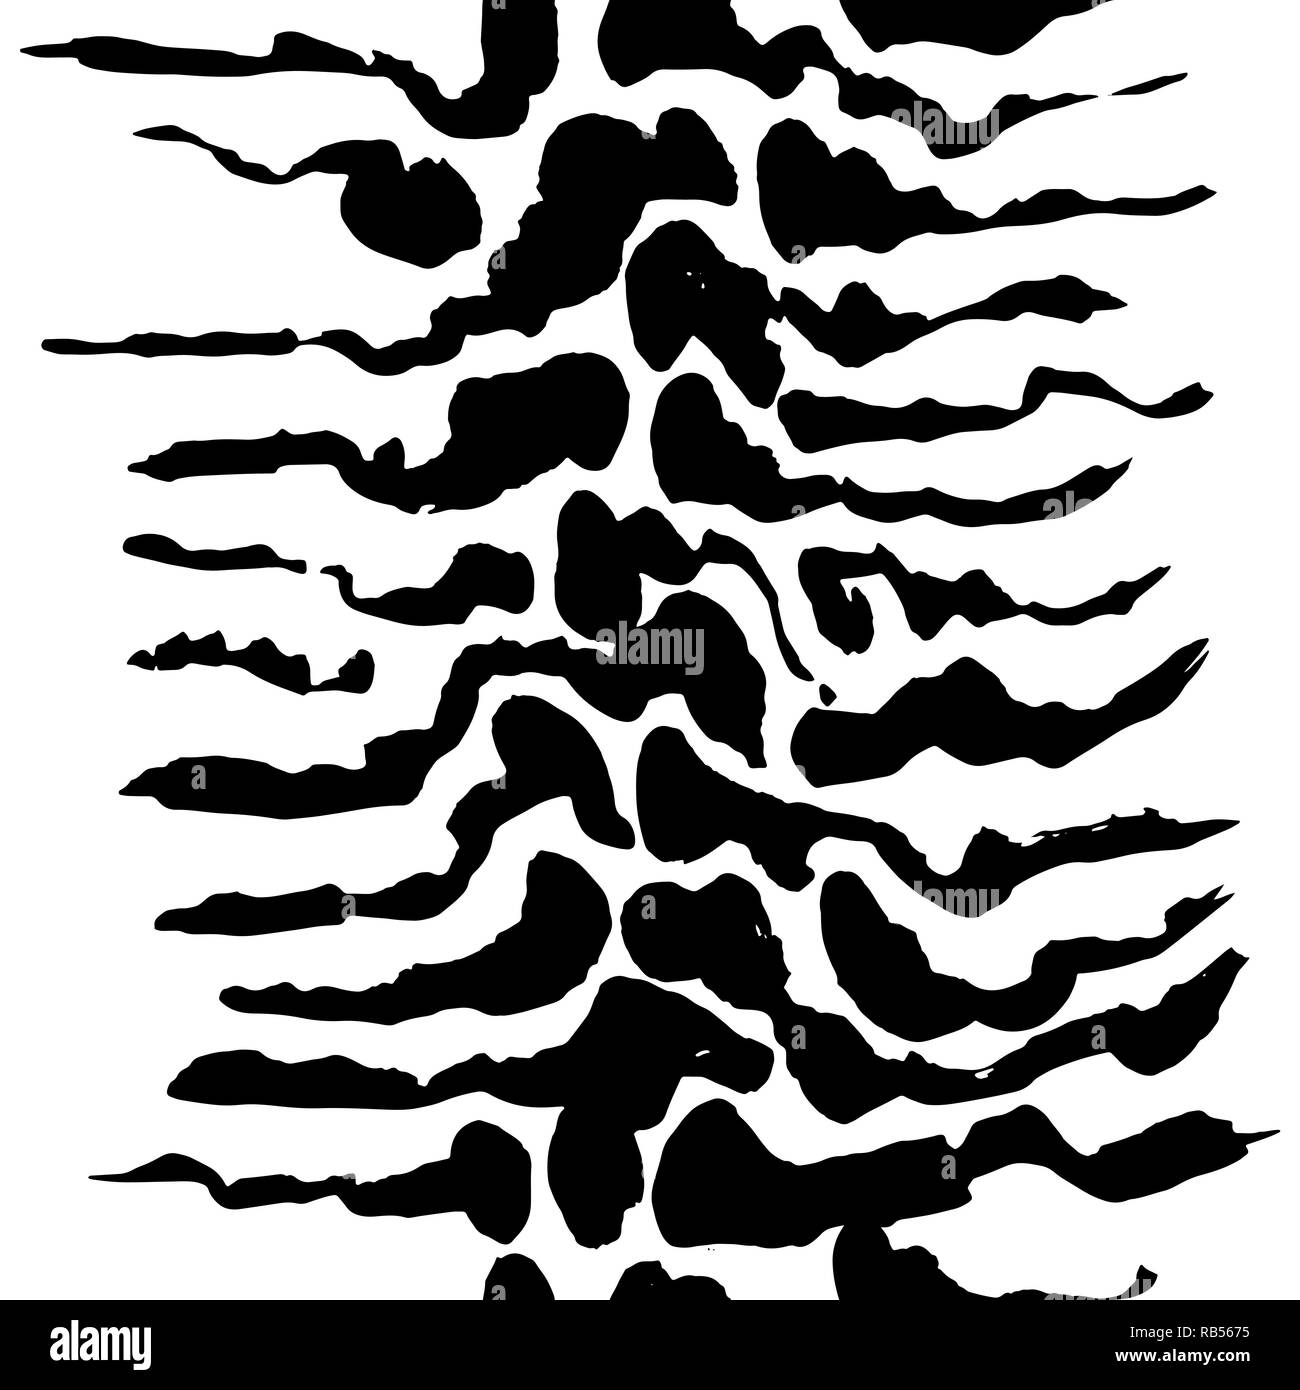 Seamless black and white tiger pattern. Tiger skin grunge texture. Vector illustration. Stock Vector